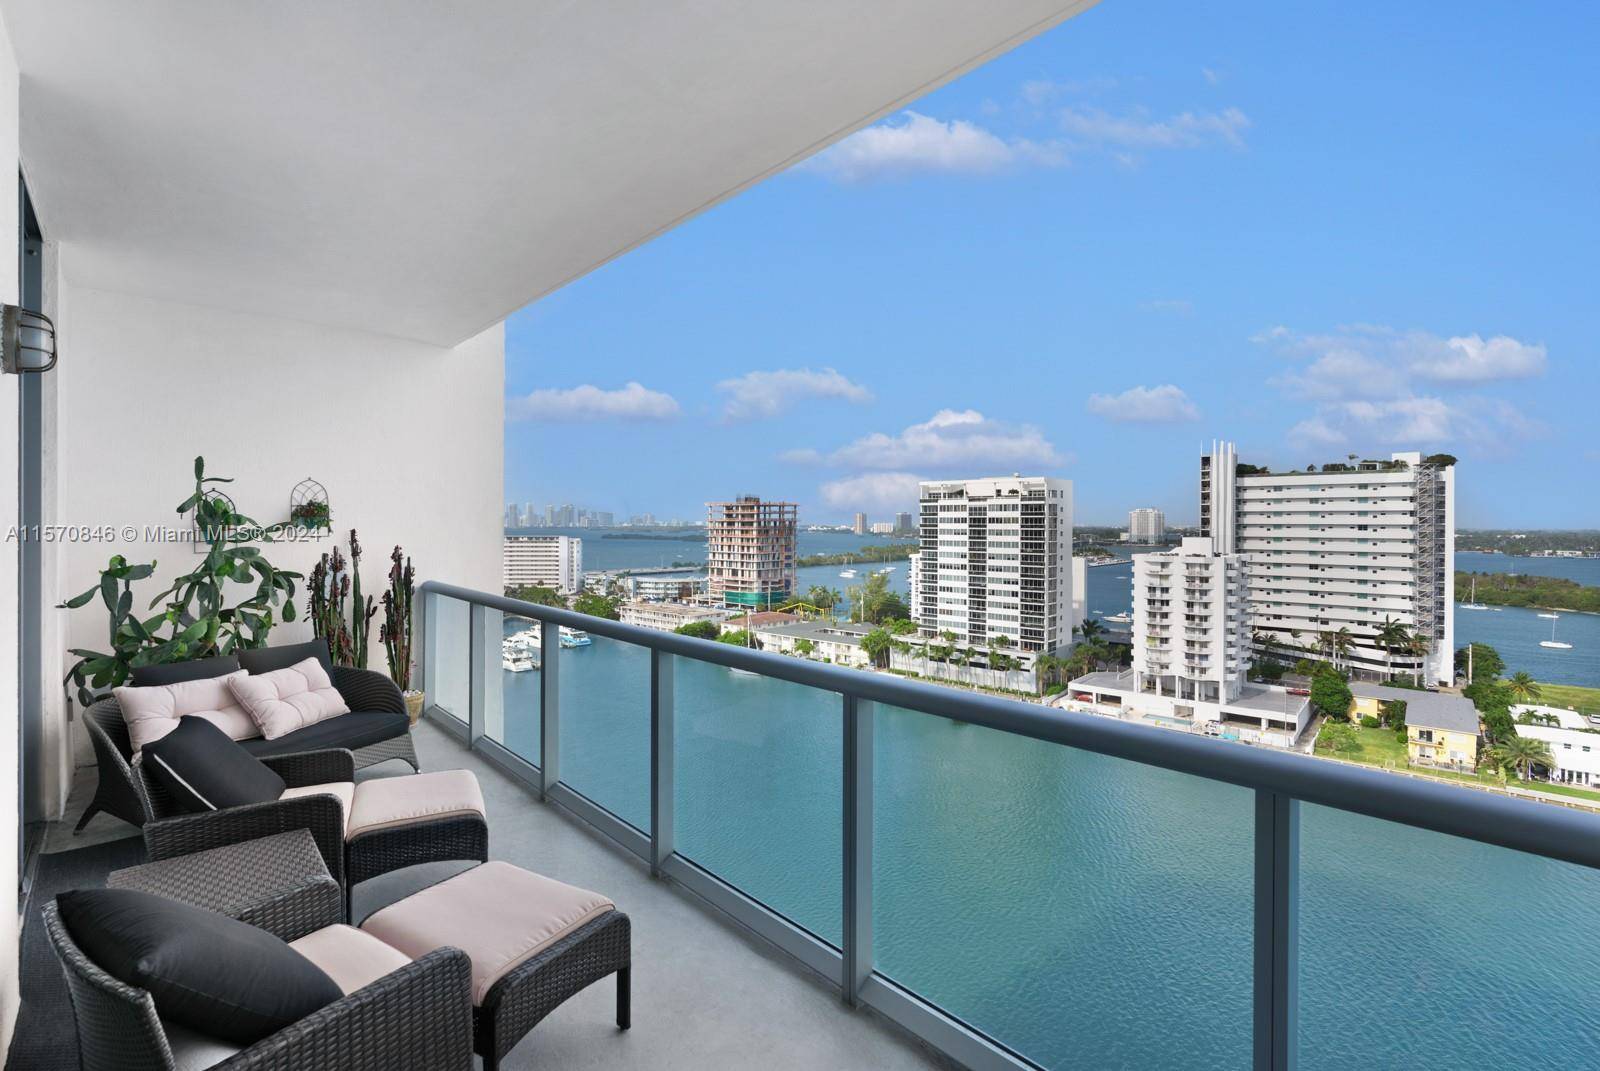 Live well in one of the most trending waterfront neighborhoods in South Florida North Bay Village.